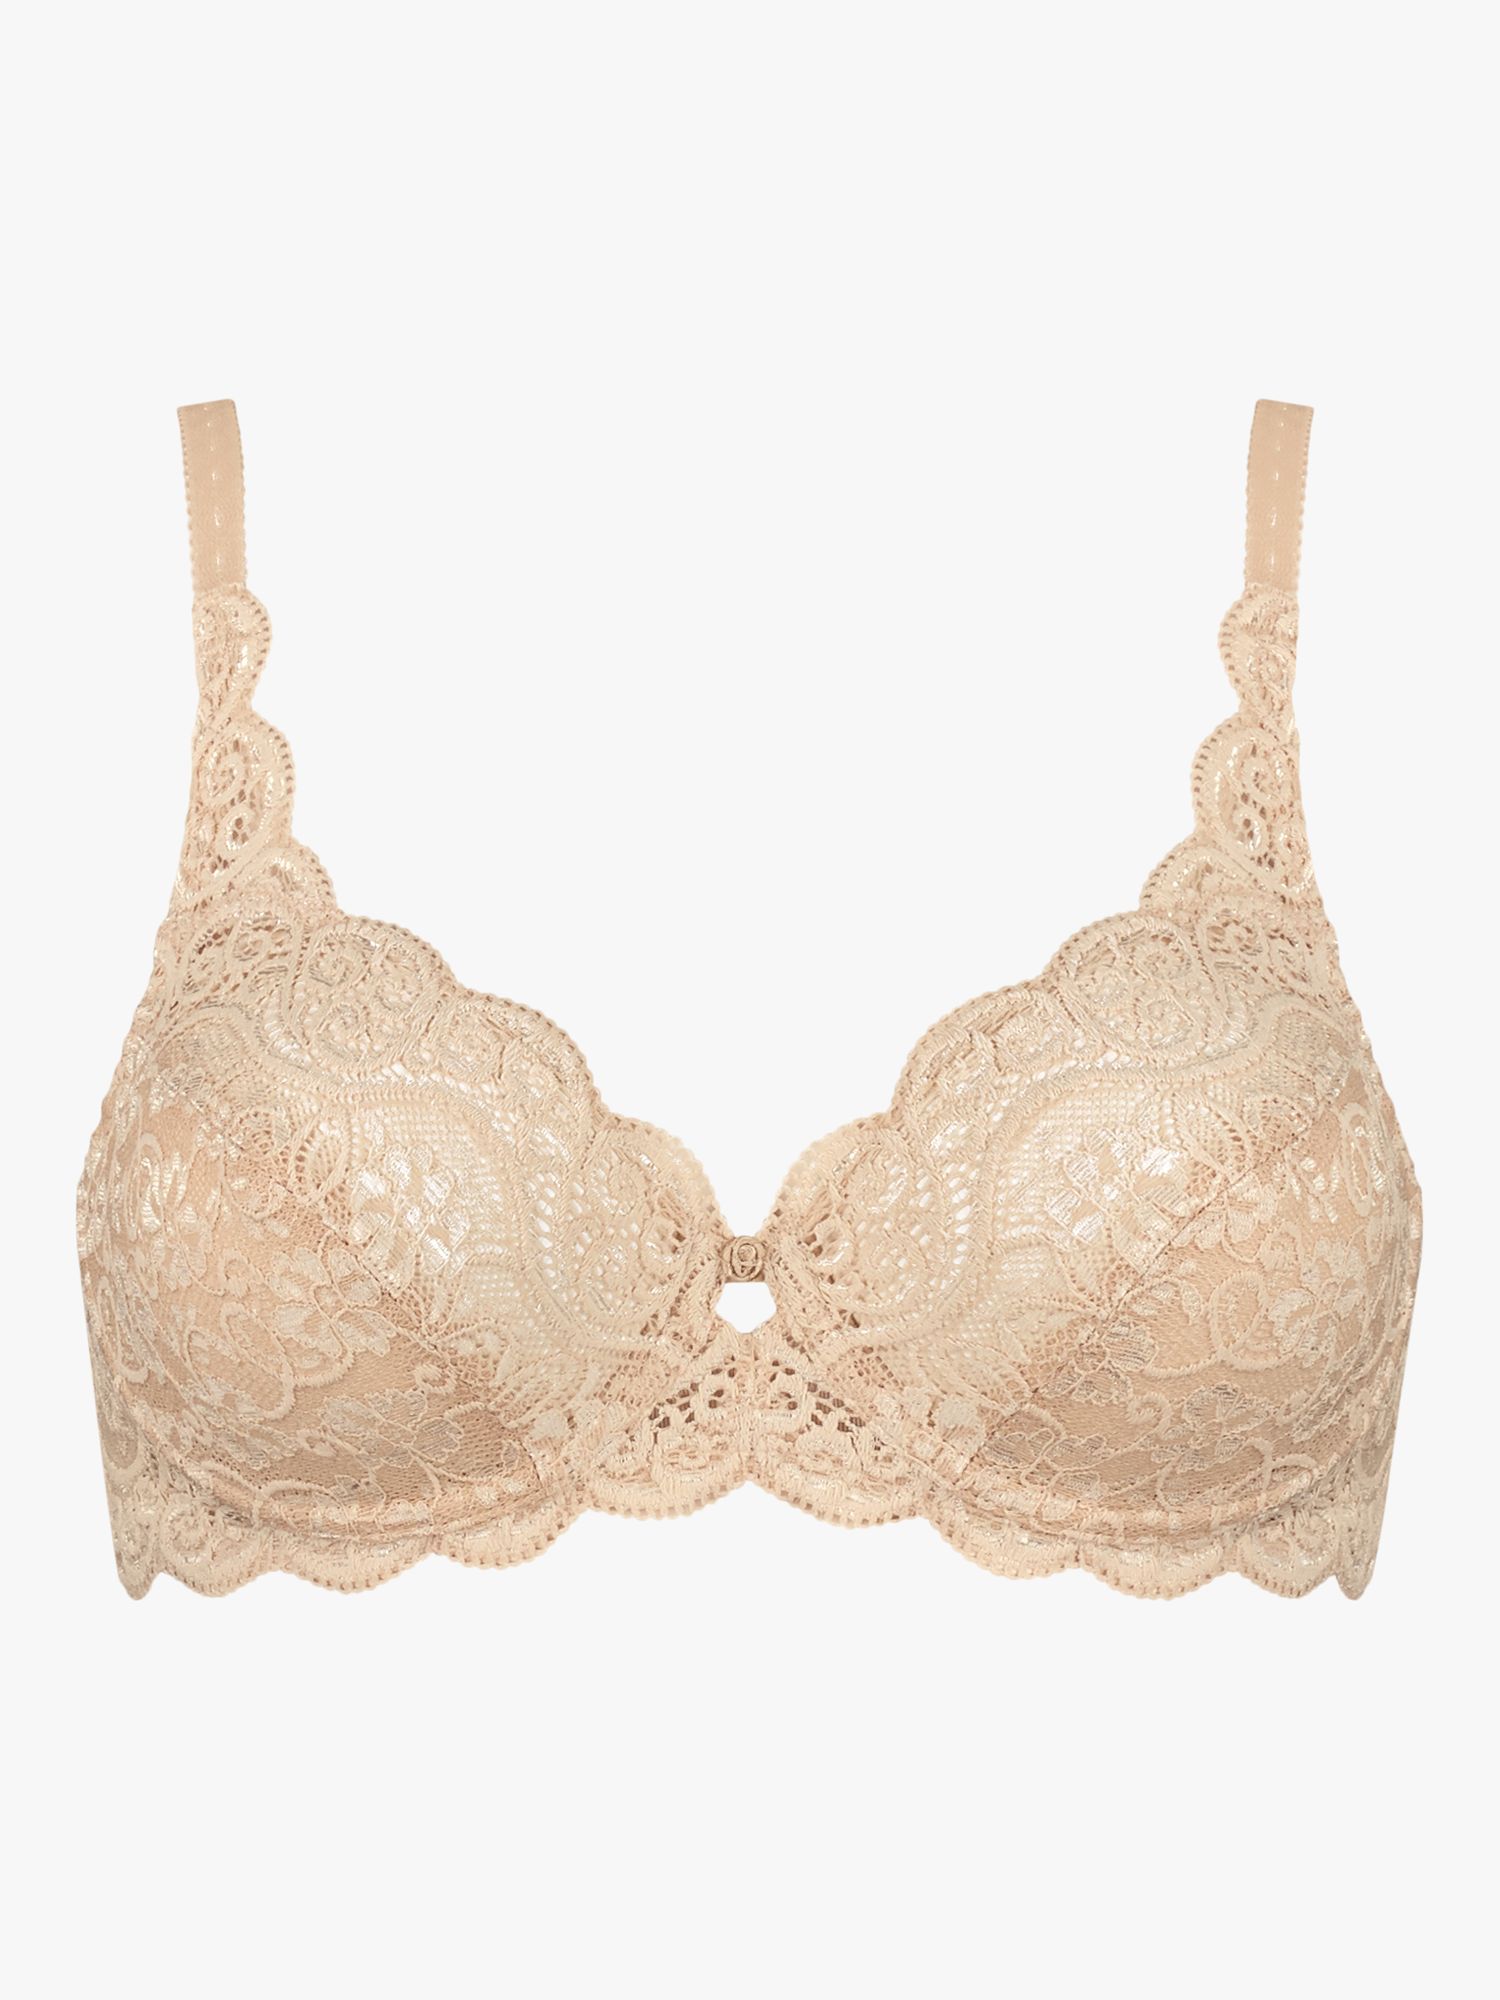 Triumph Amourette 300 Underwired Lace Bra, Toast at John Lewis